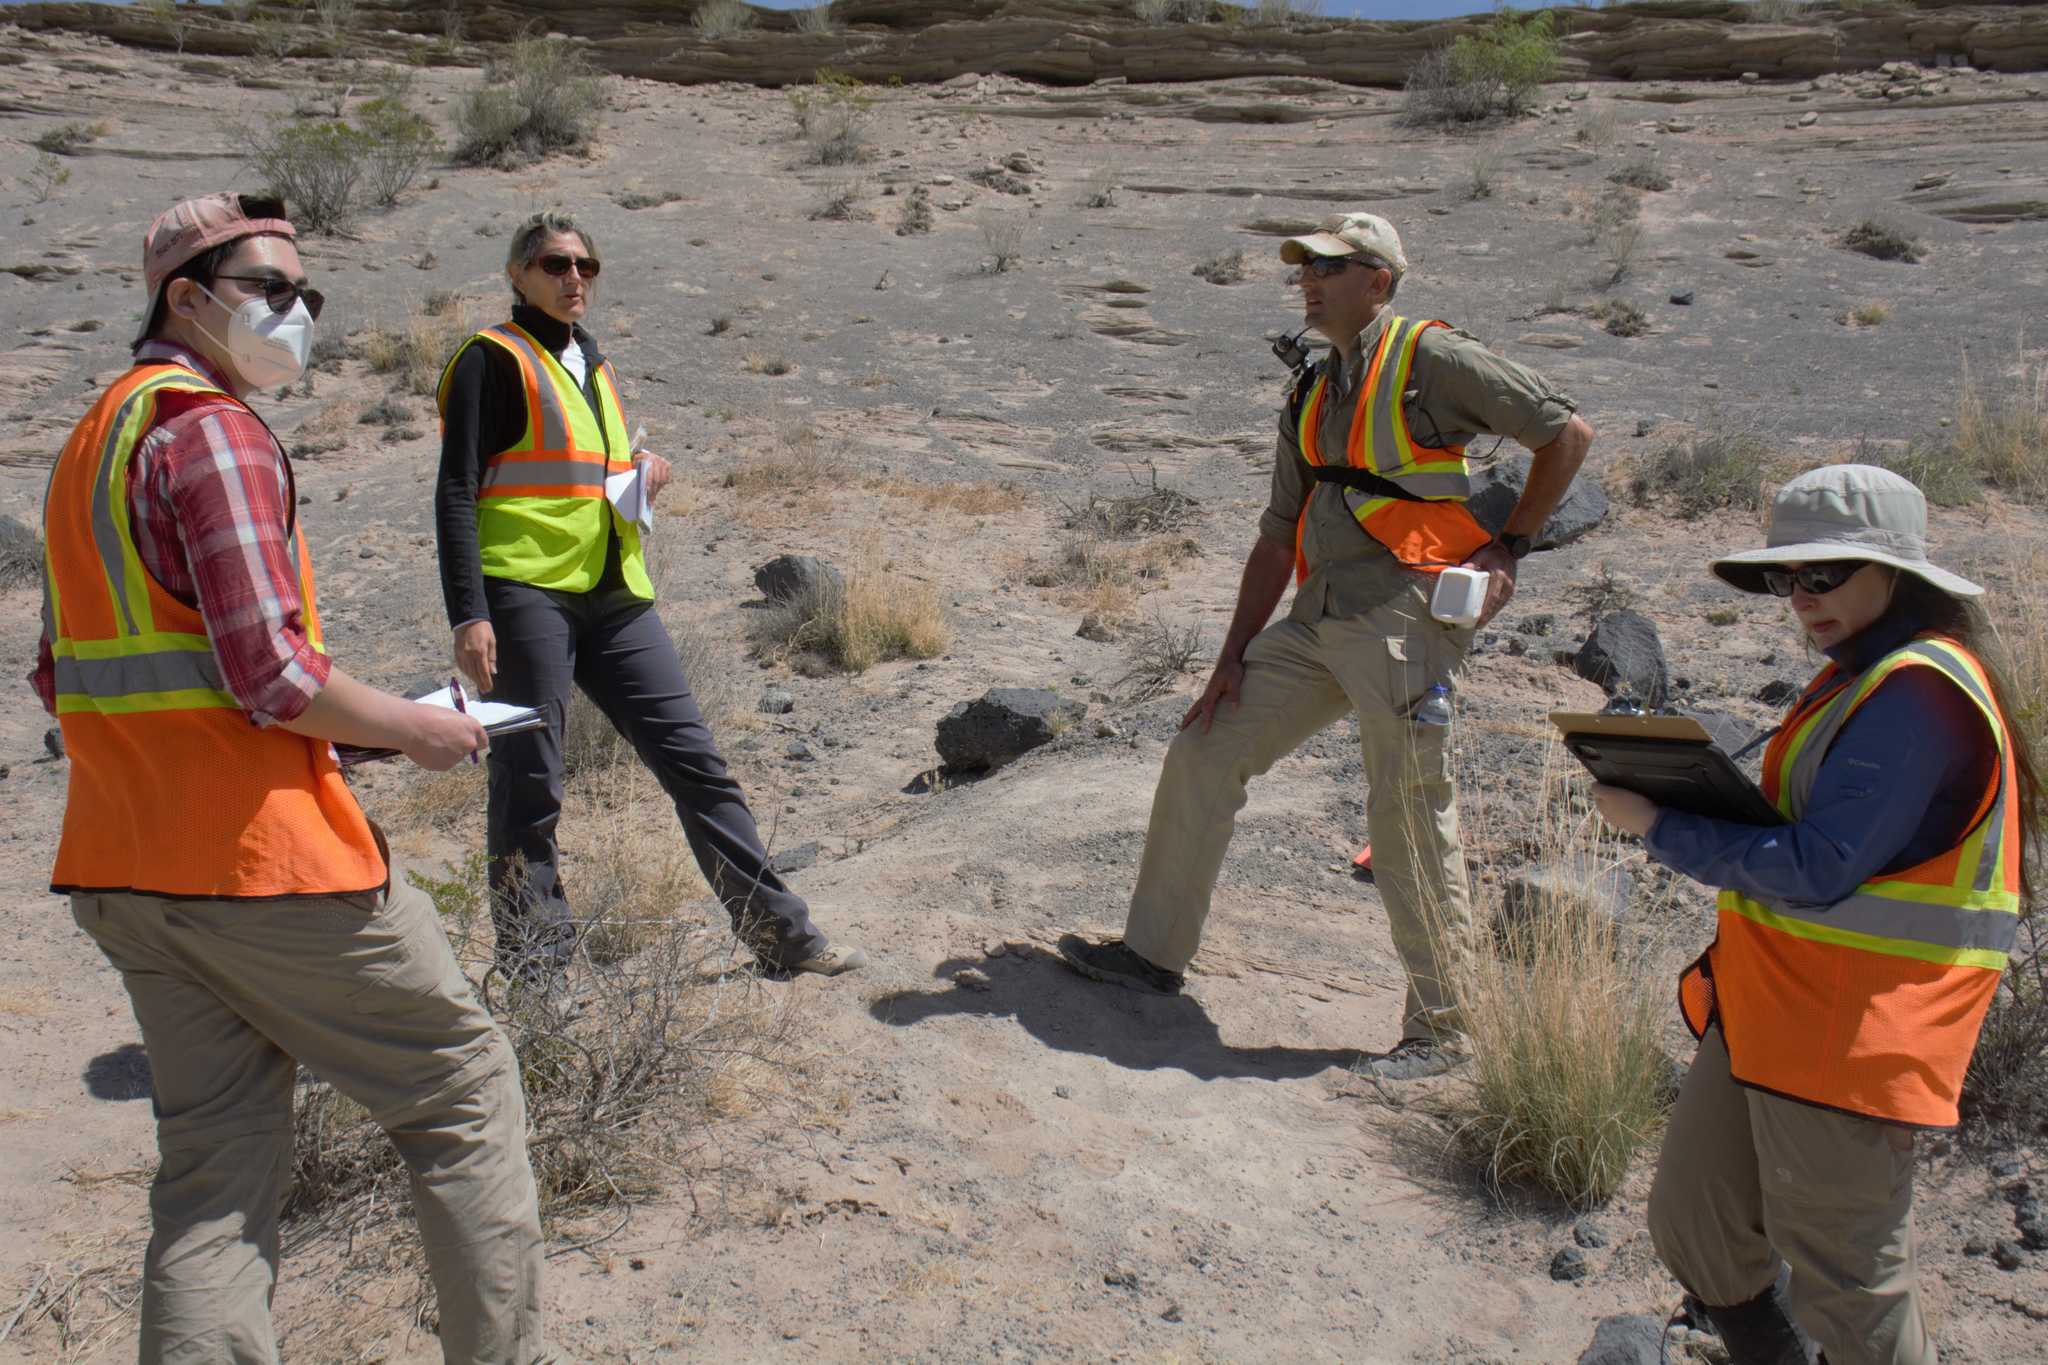 Zach Morse leads discussion on EVAs with NASA colleagues at Potrillo Volcanic Field in New Mexico, April 2022